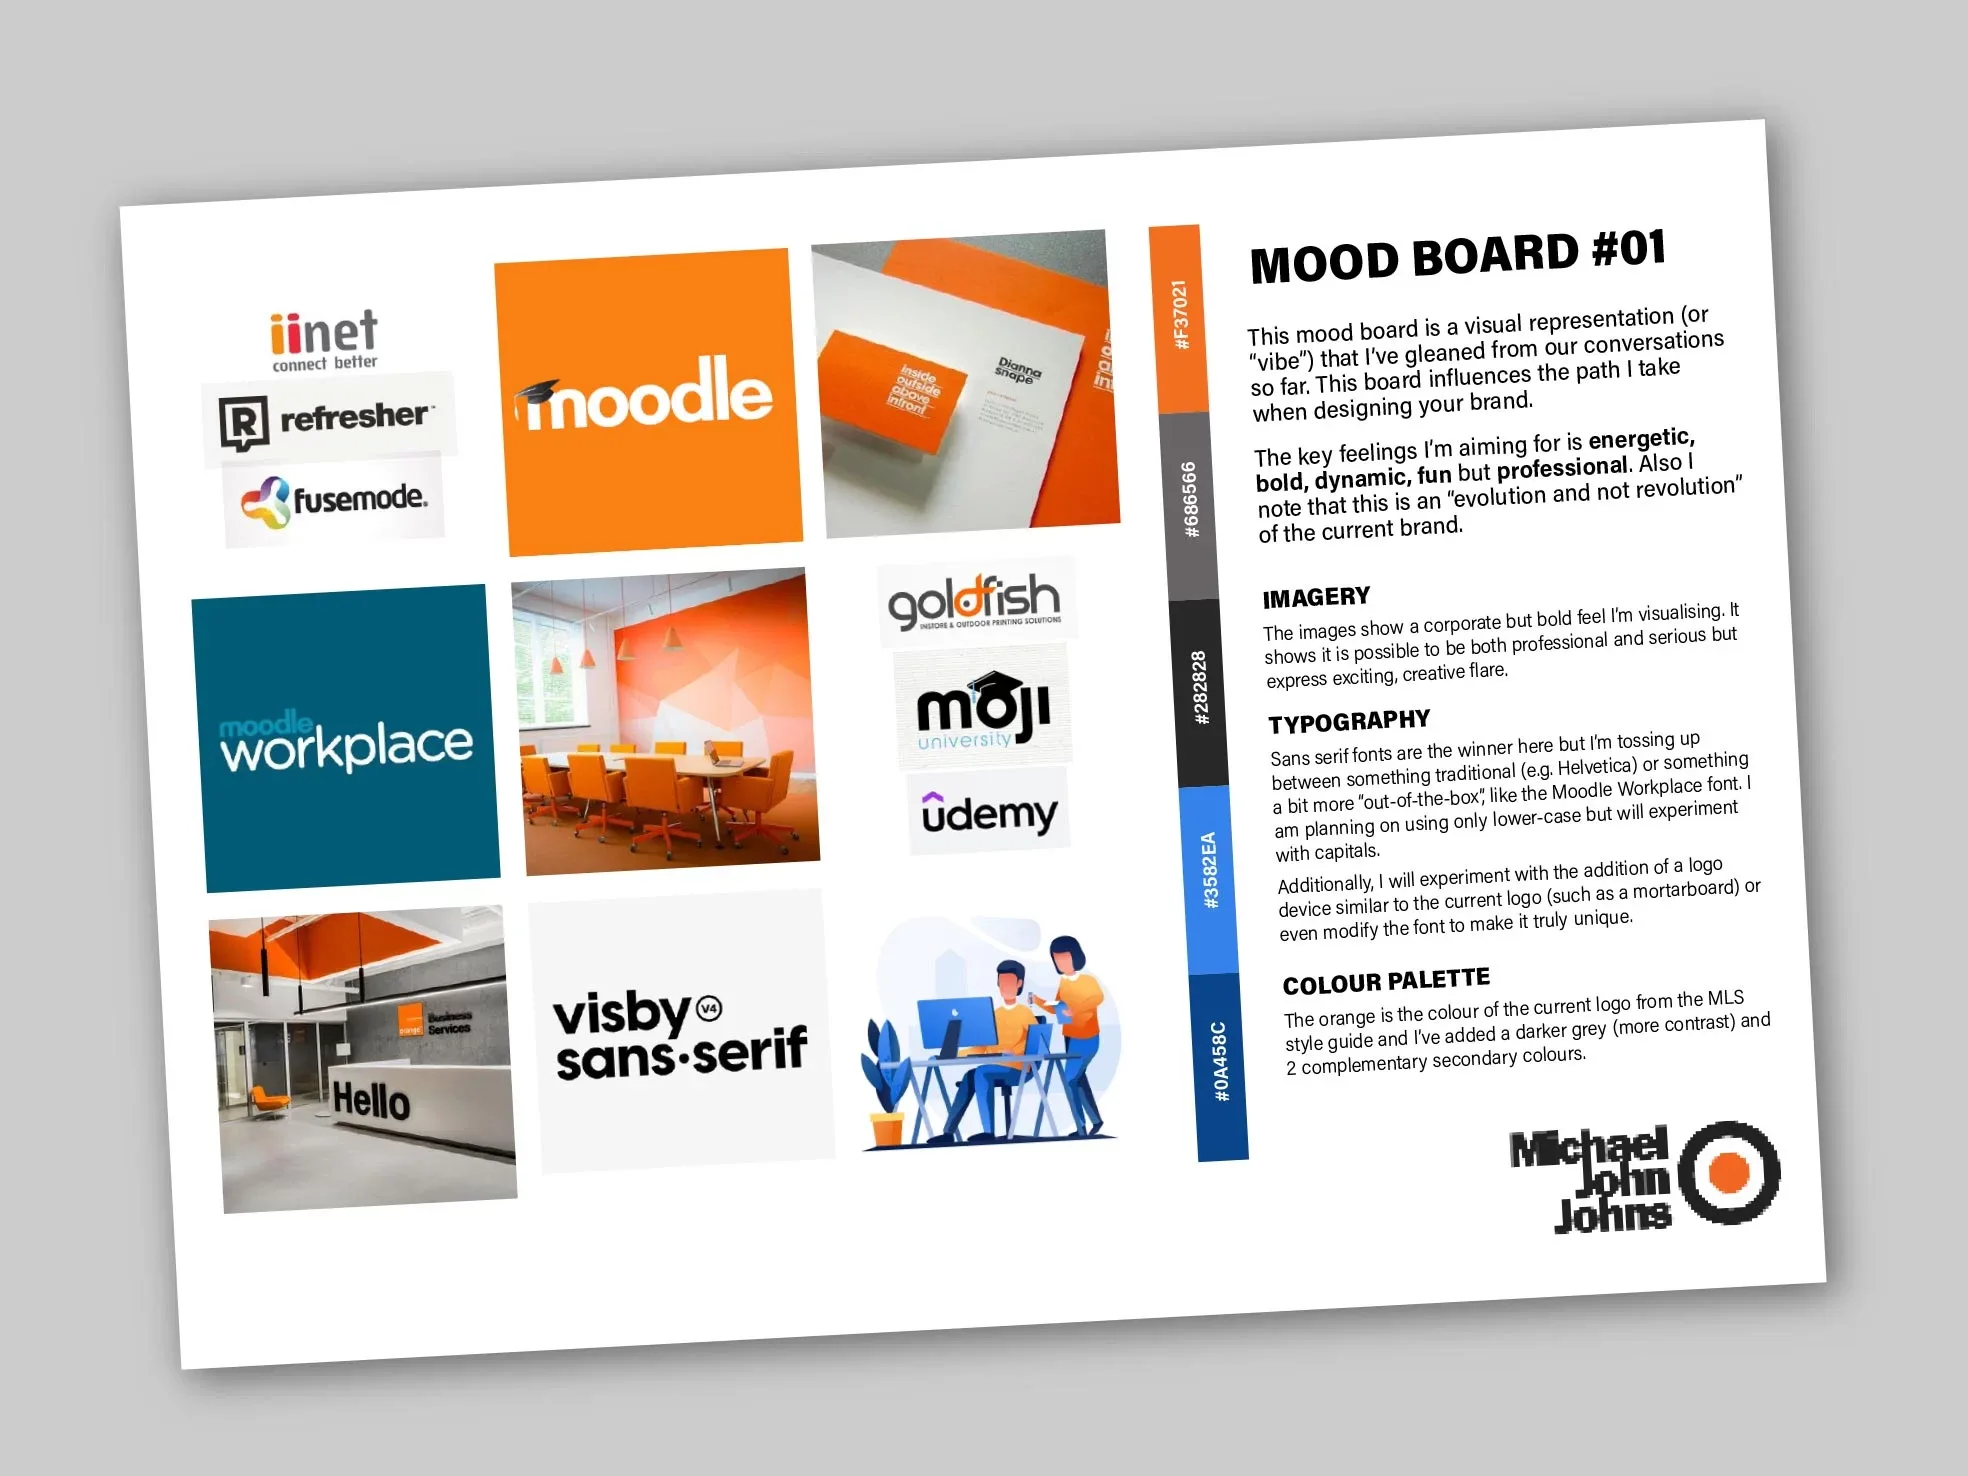 Moodboard used for recent corporate identity project